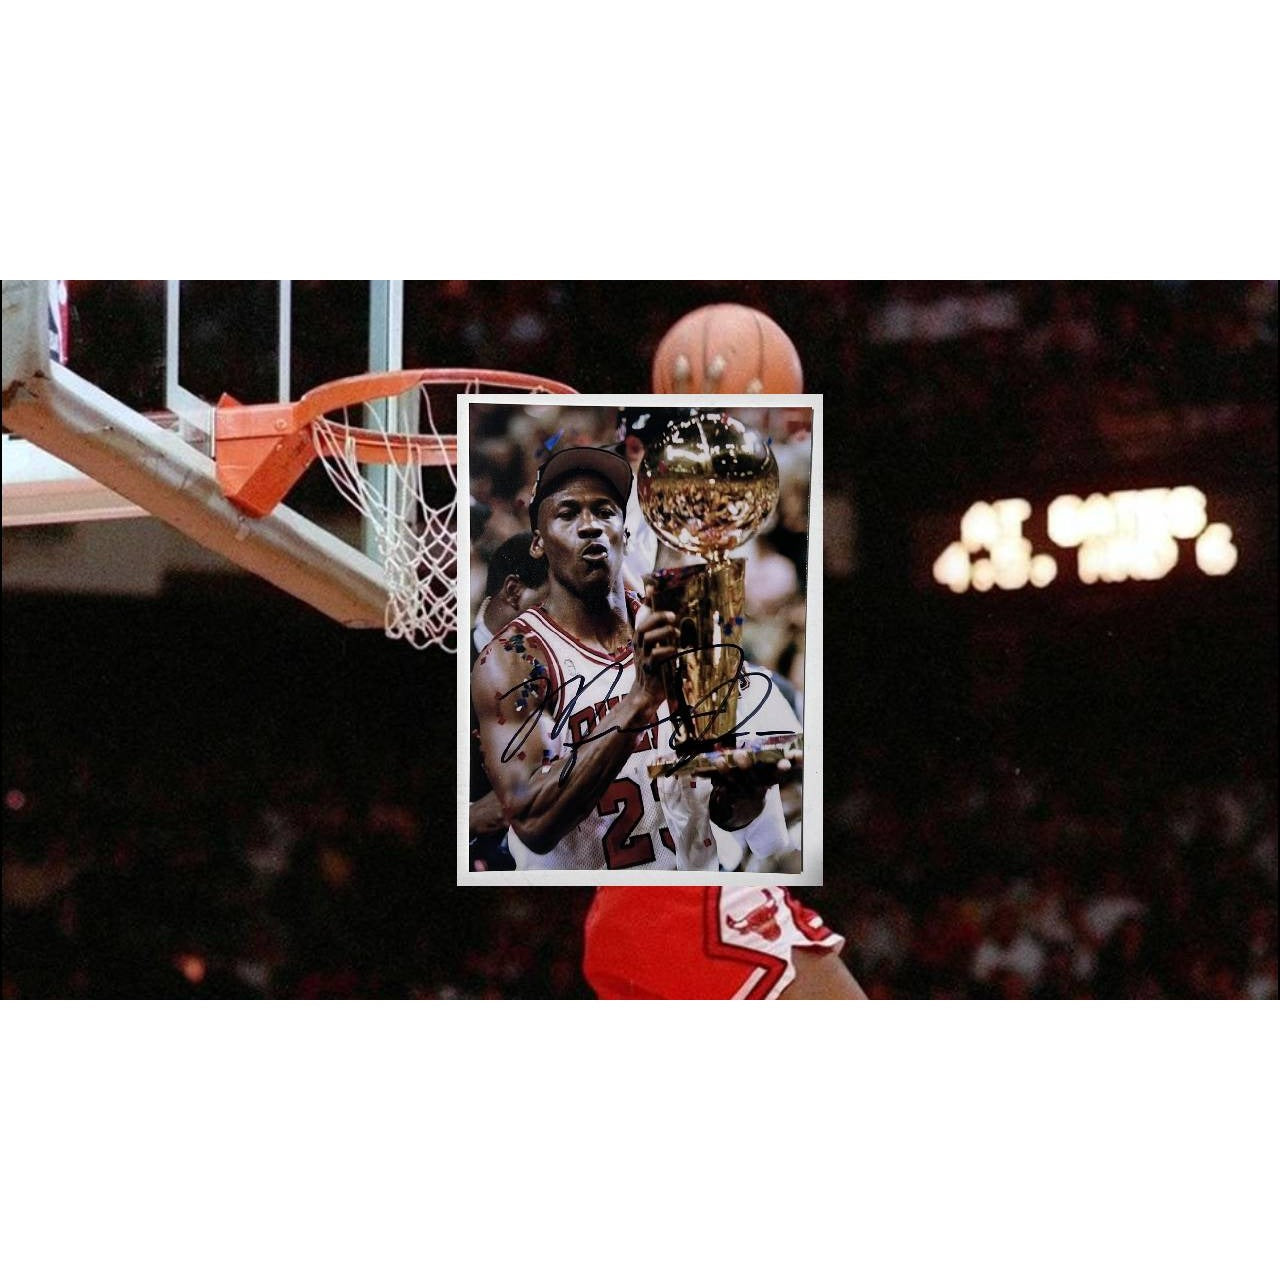 Michael Jordan 5 x 7 photograph signed with proof